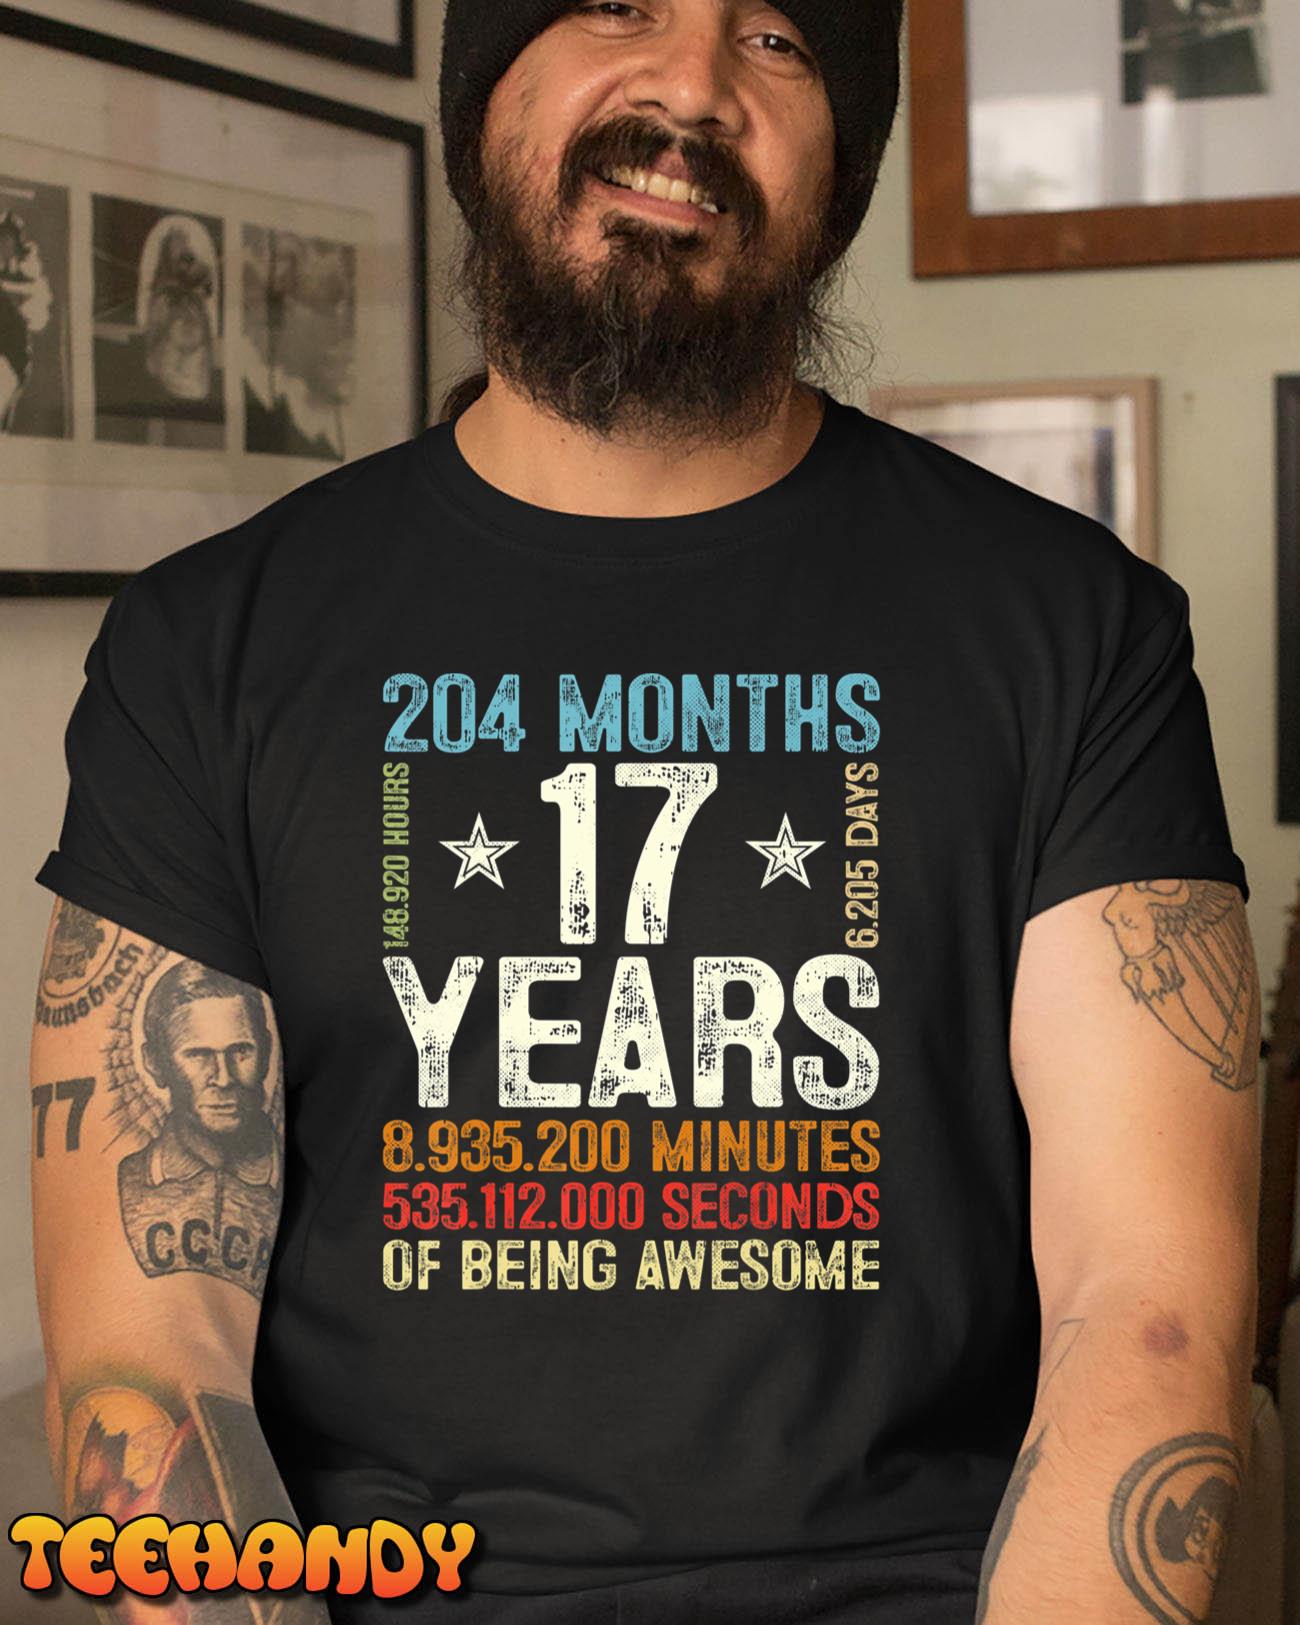 17 Years 204 Months Of Being Awesome 17th Birthday Gifts T-Shirt